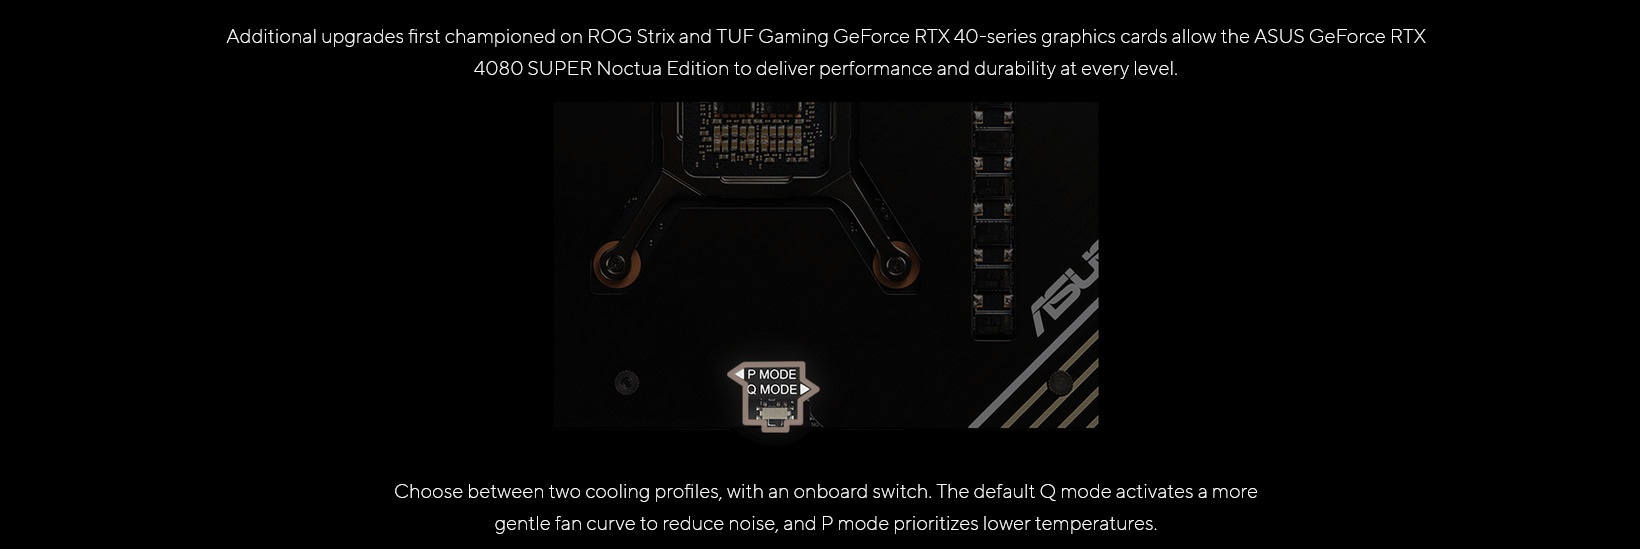 A large marketing image providing additional information about the product ASUS GeForce RTX 4080 SUPER Noctua OC 16GB GDDR6X - Additional alt info not provided